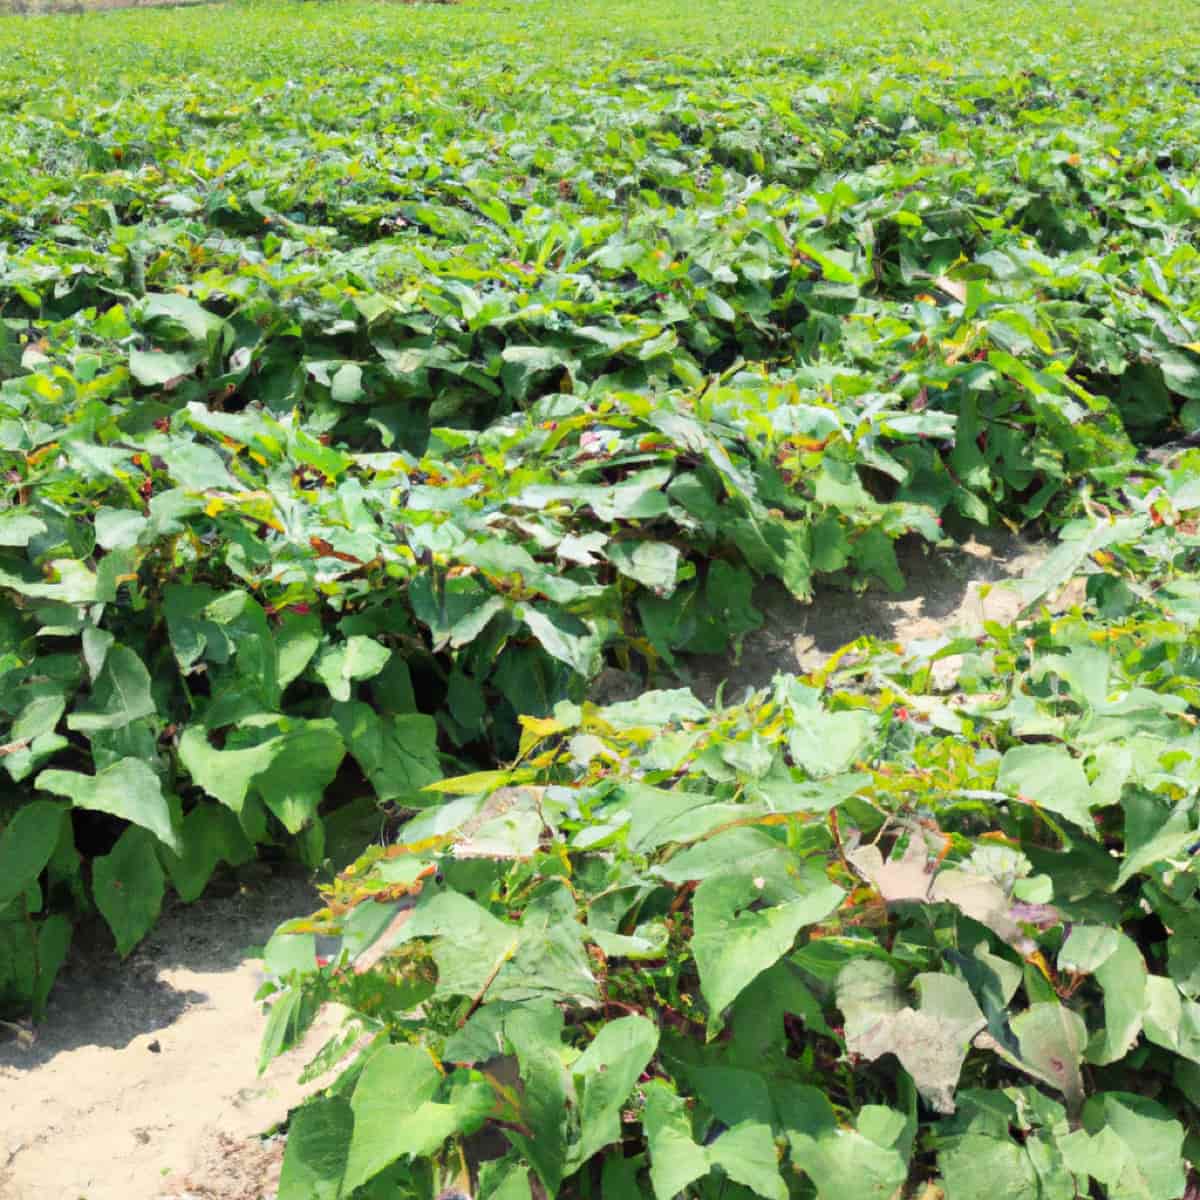 How to Treat Sweet Potato Pests and Diseases